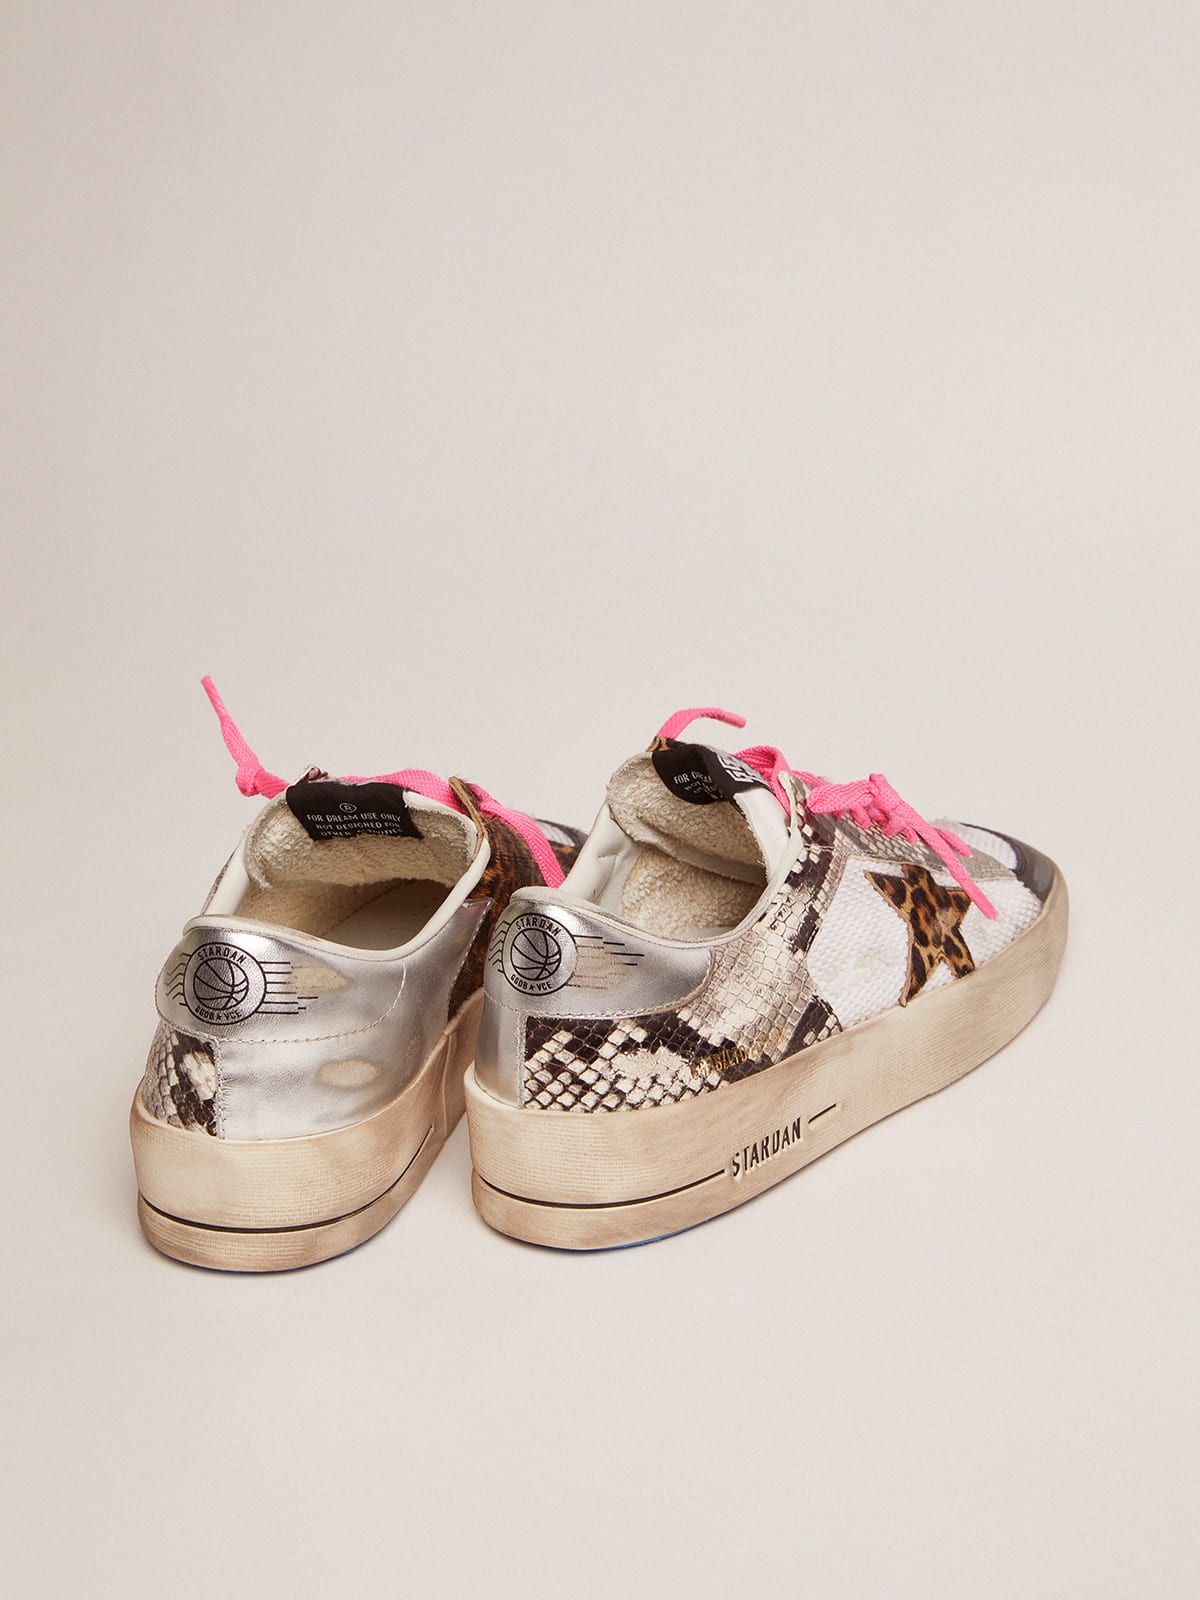 Golden Goose - Women’s Stardan LAB sneakers with leather upper and leopard-print pony skin star in 